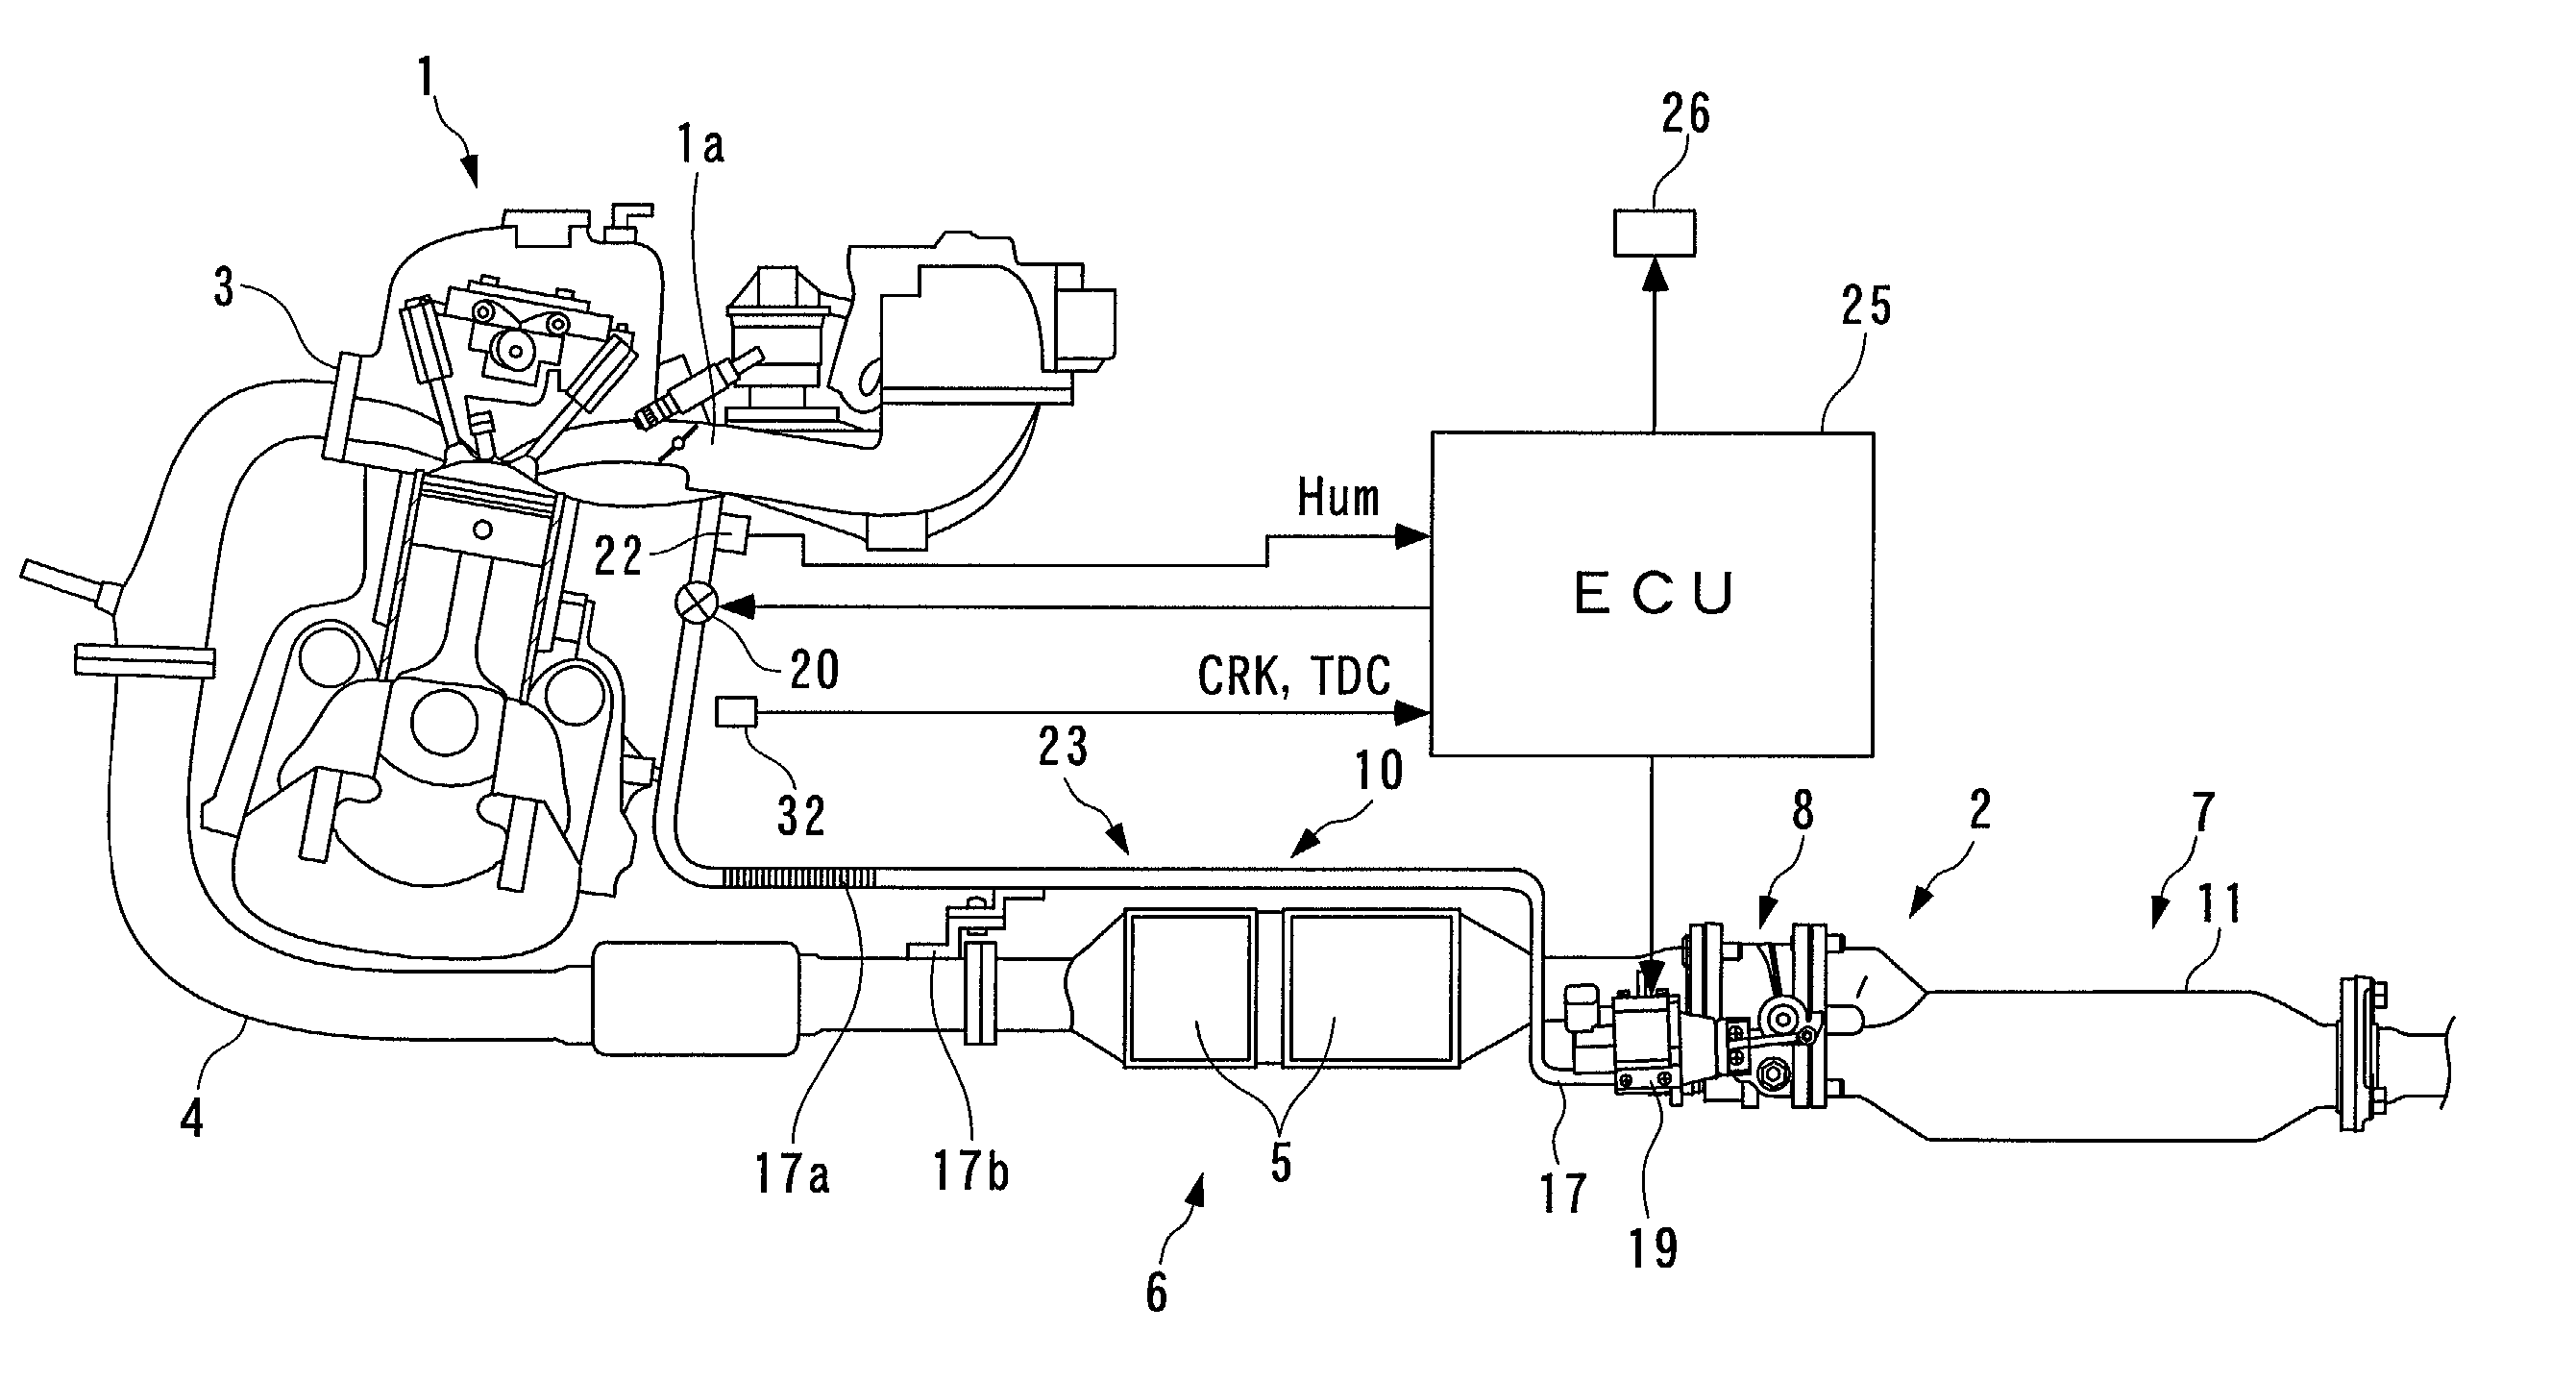 State determining apparatus for exhaust gas recirculation system